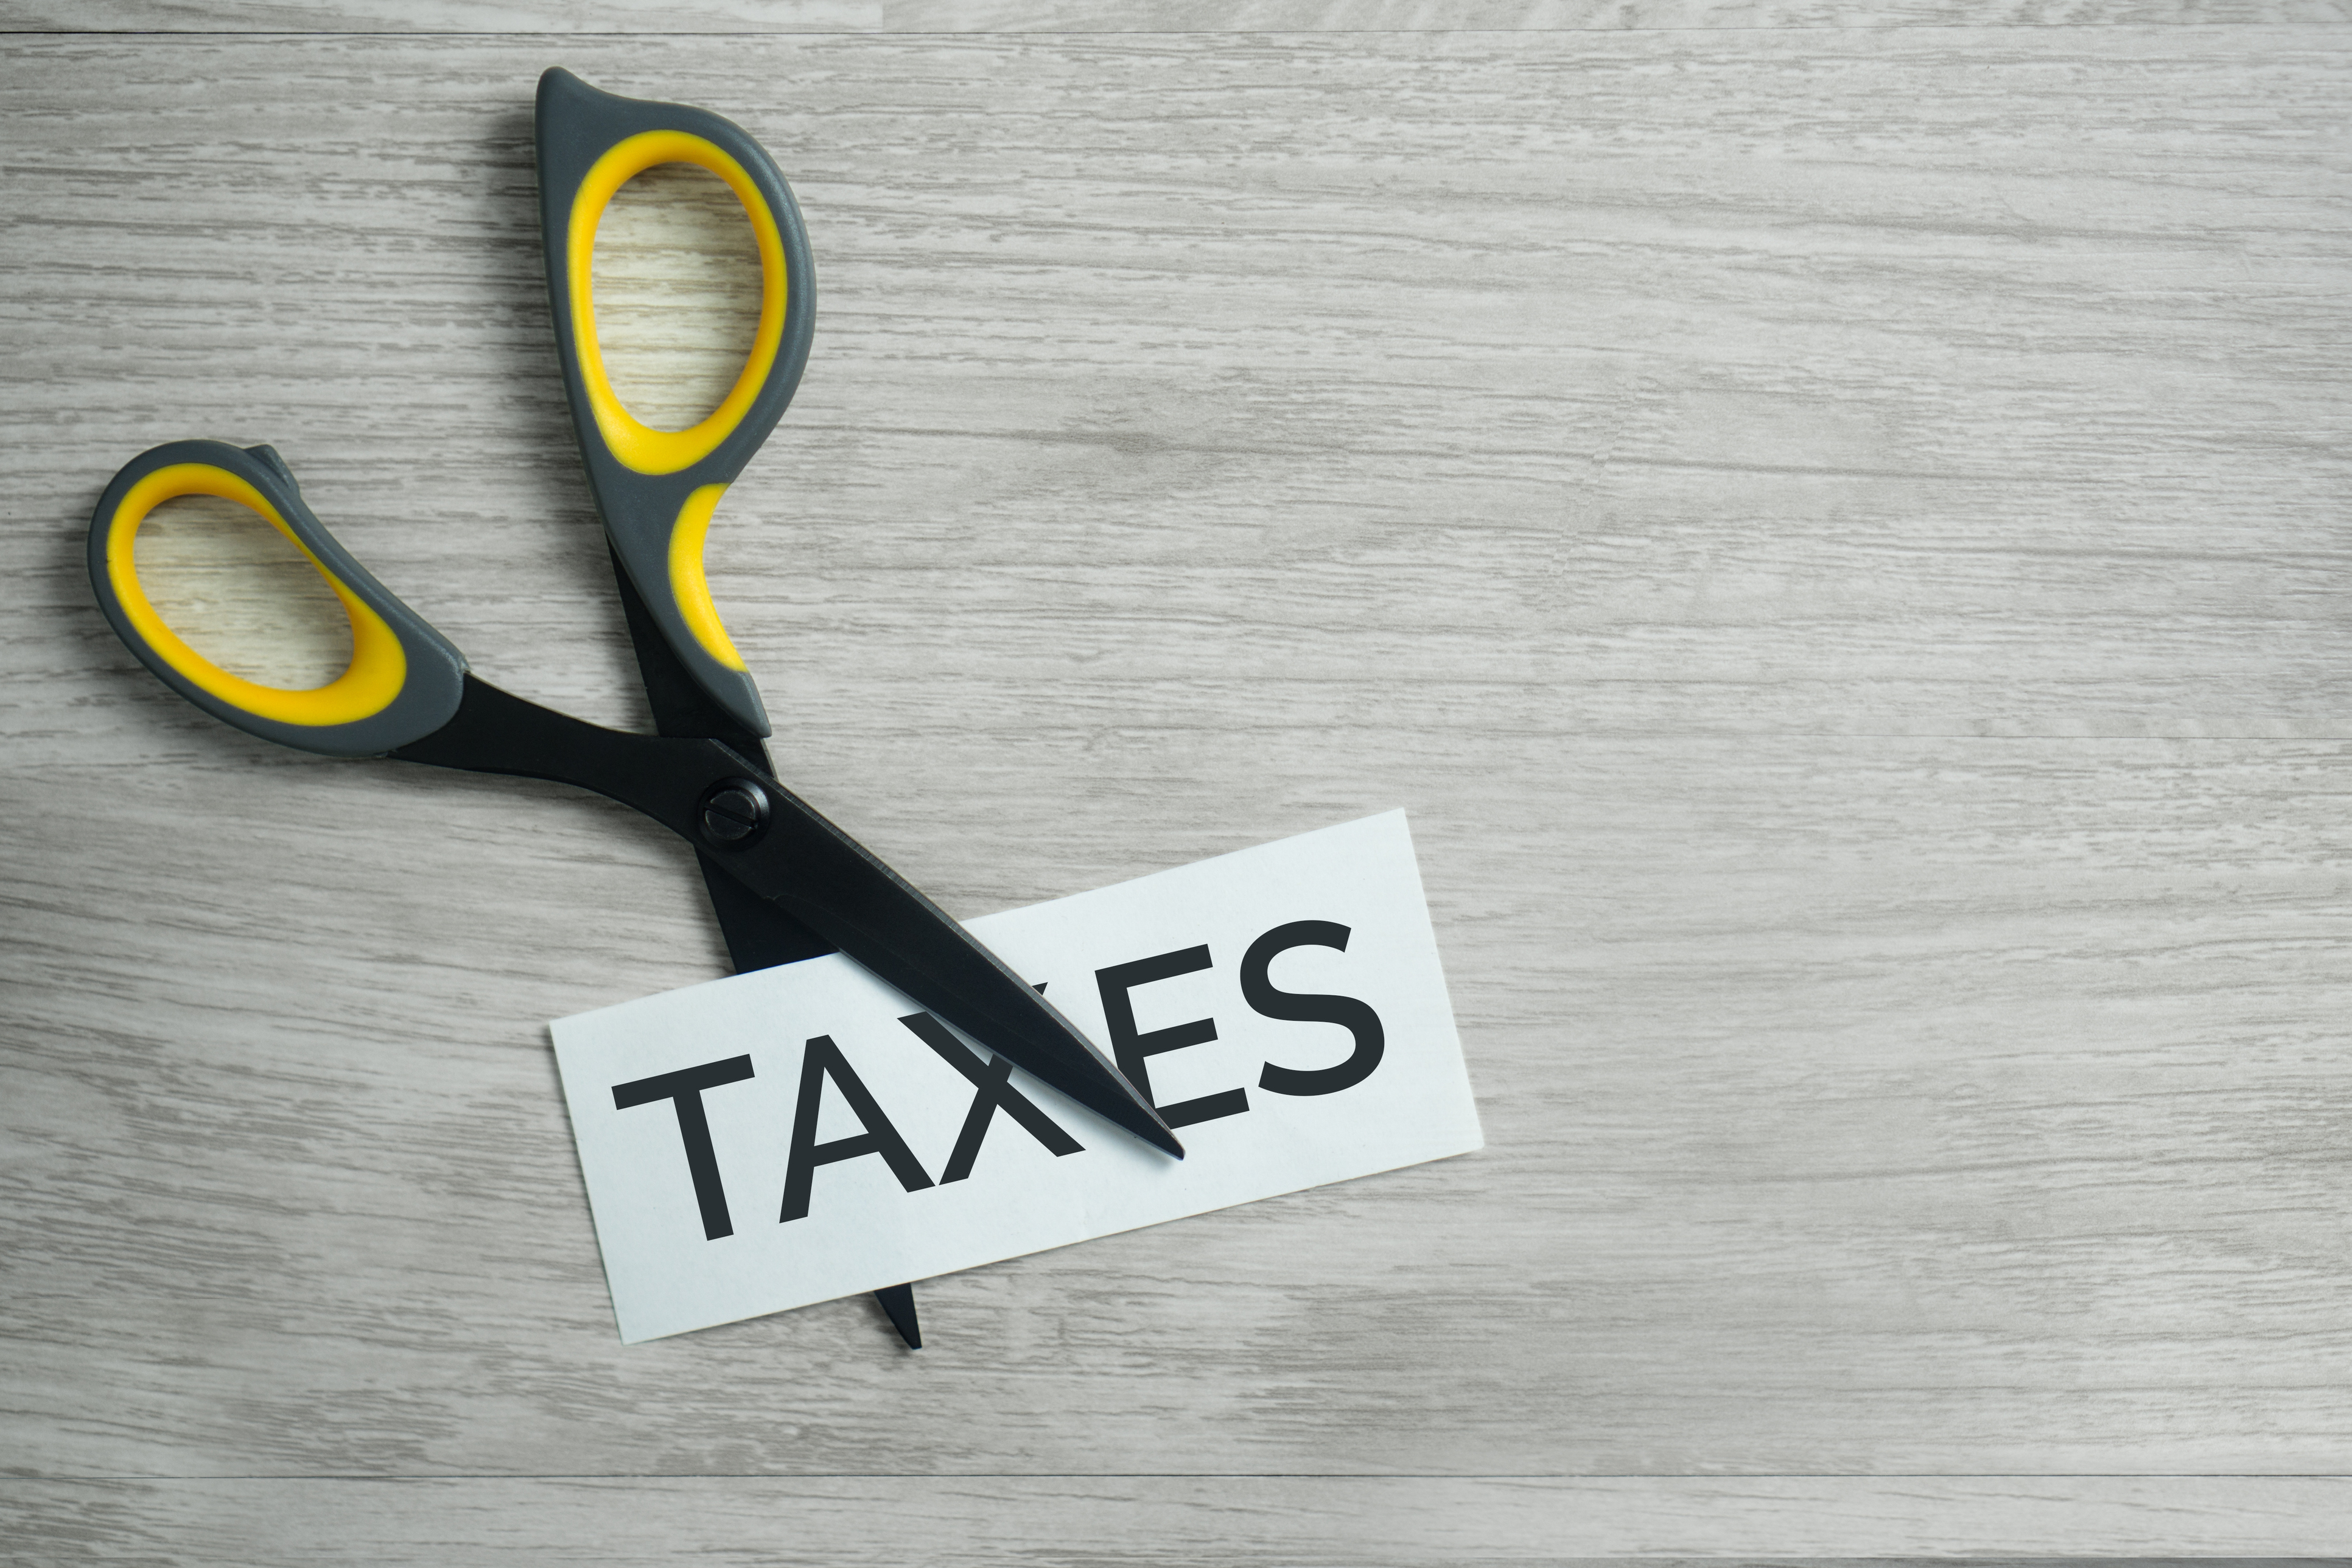 Small Businesses: There is Still Time to Cut Your 2019 Taxes